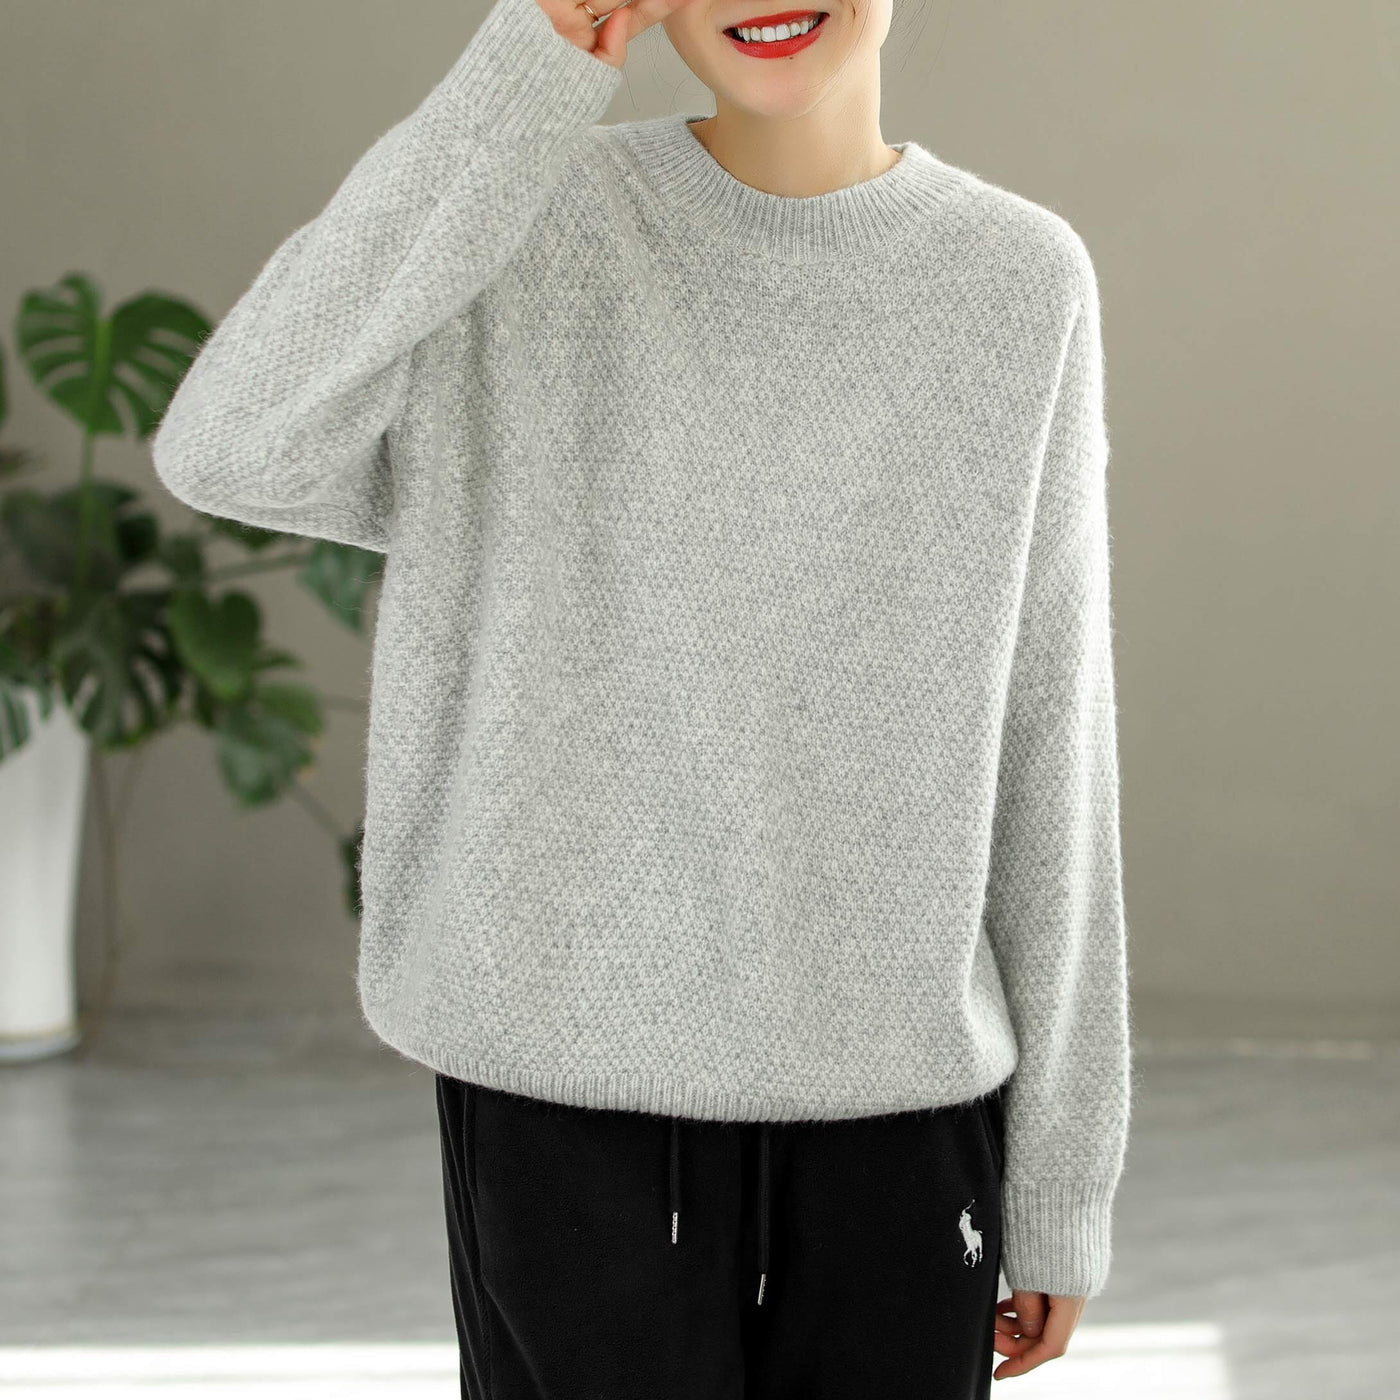 Women Solid Loose Knitted Autumn Winter Warm Sweater